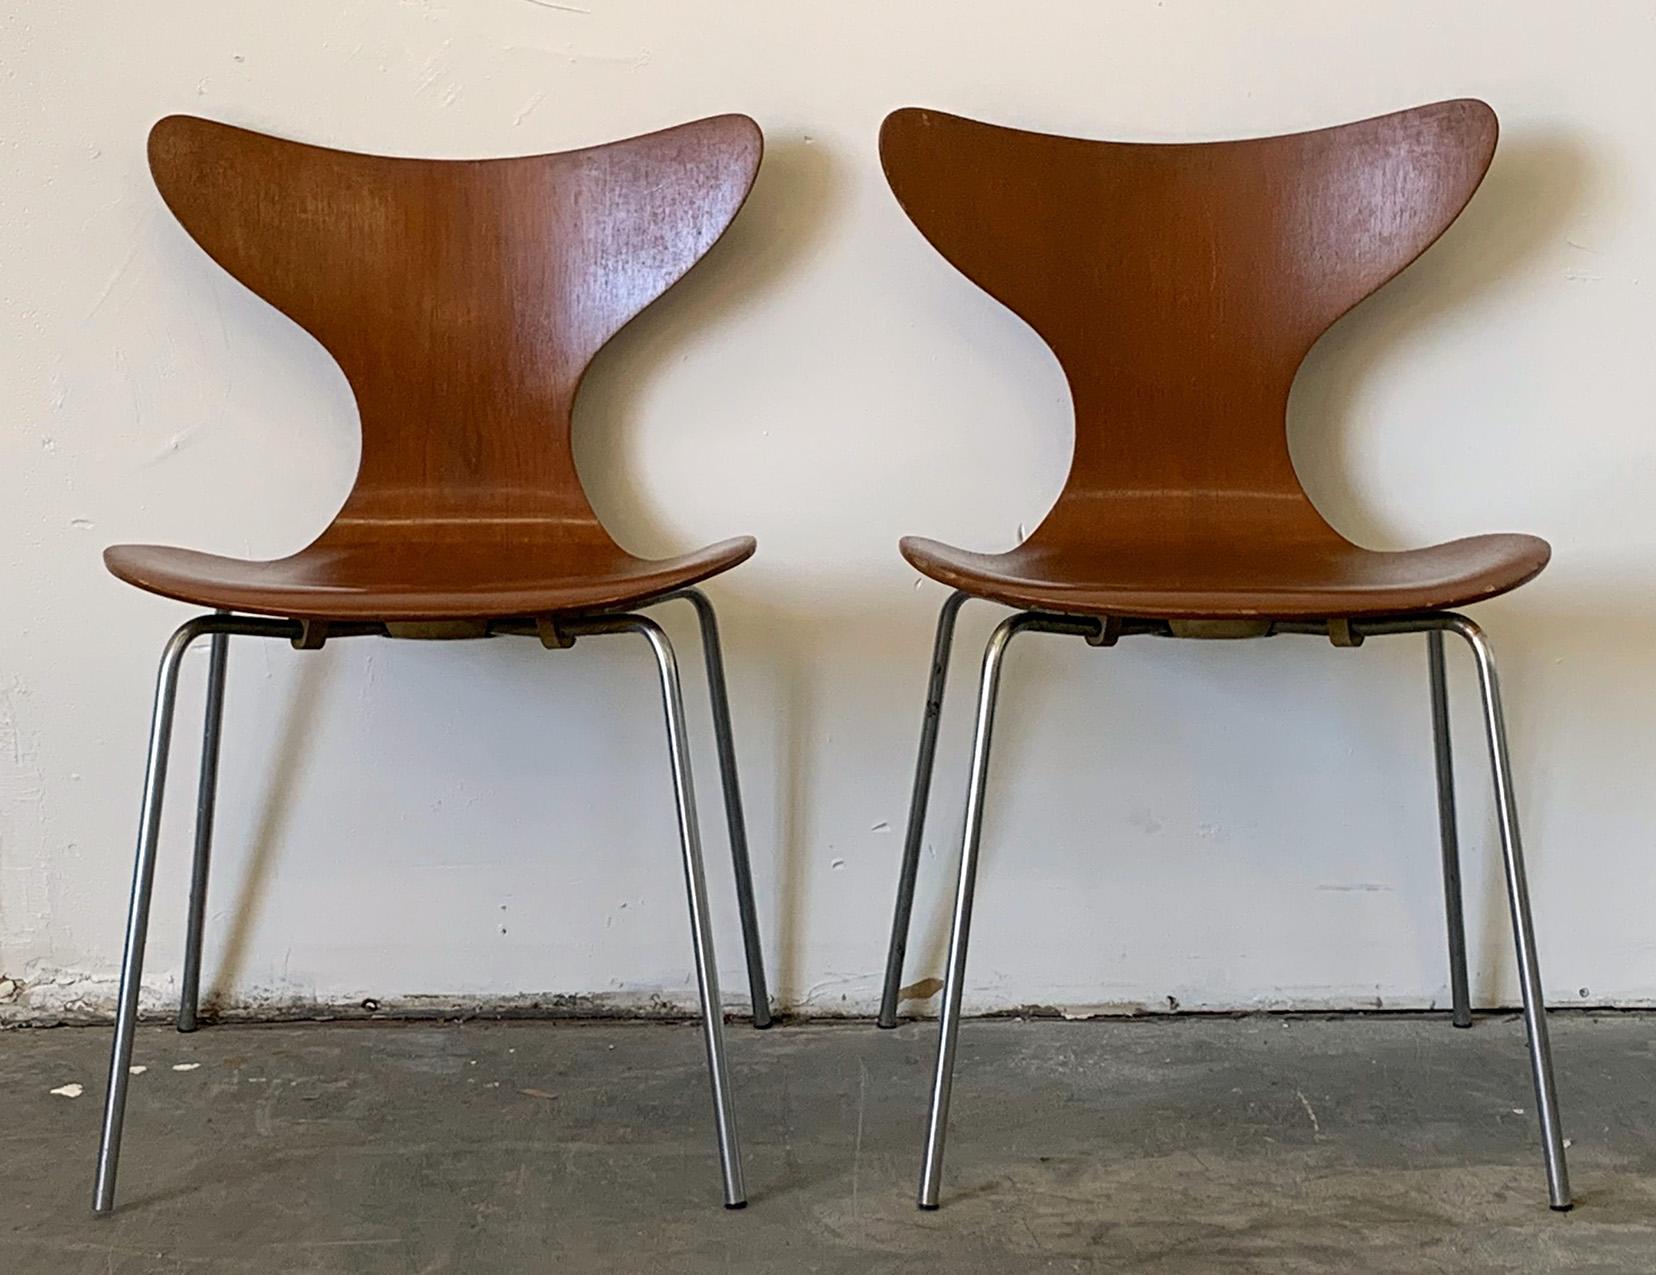 An early pair of Arne Jacobsen Lily chairs for Fritz Hansen. According to Danish Design Review, the lily, magen, or sea gull chair was shown at the Scandinavian Furniture Fair in Copenhagen in 1969.

